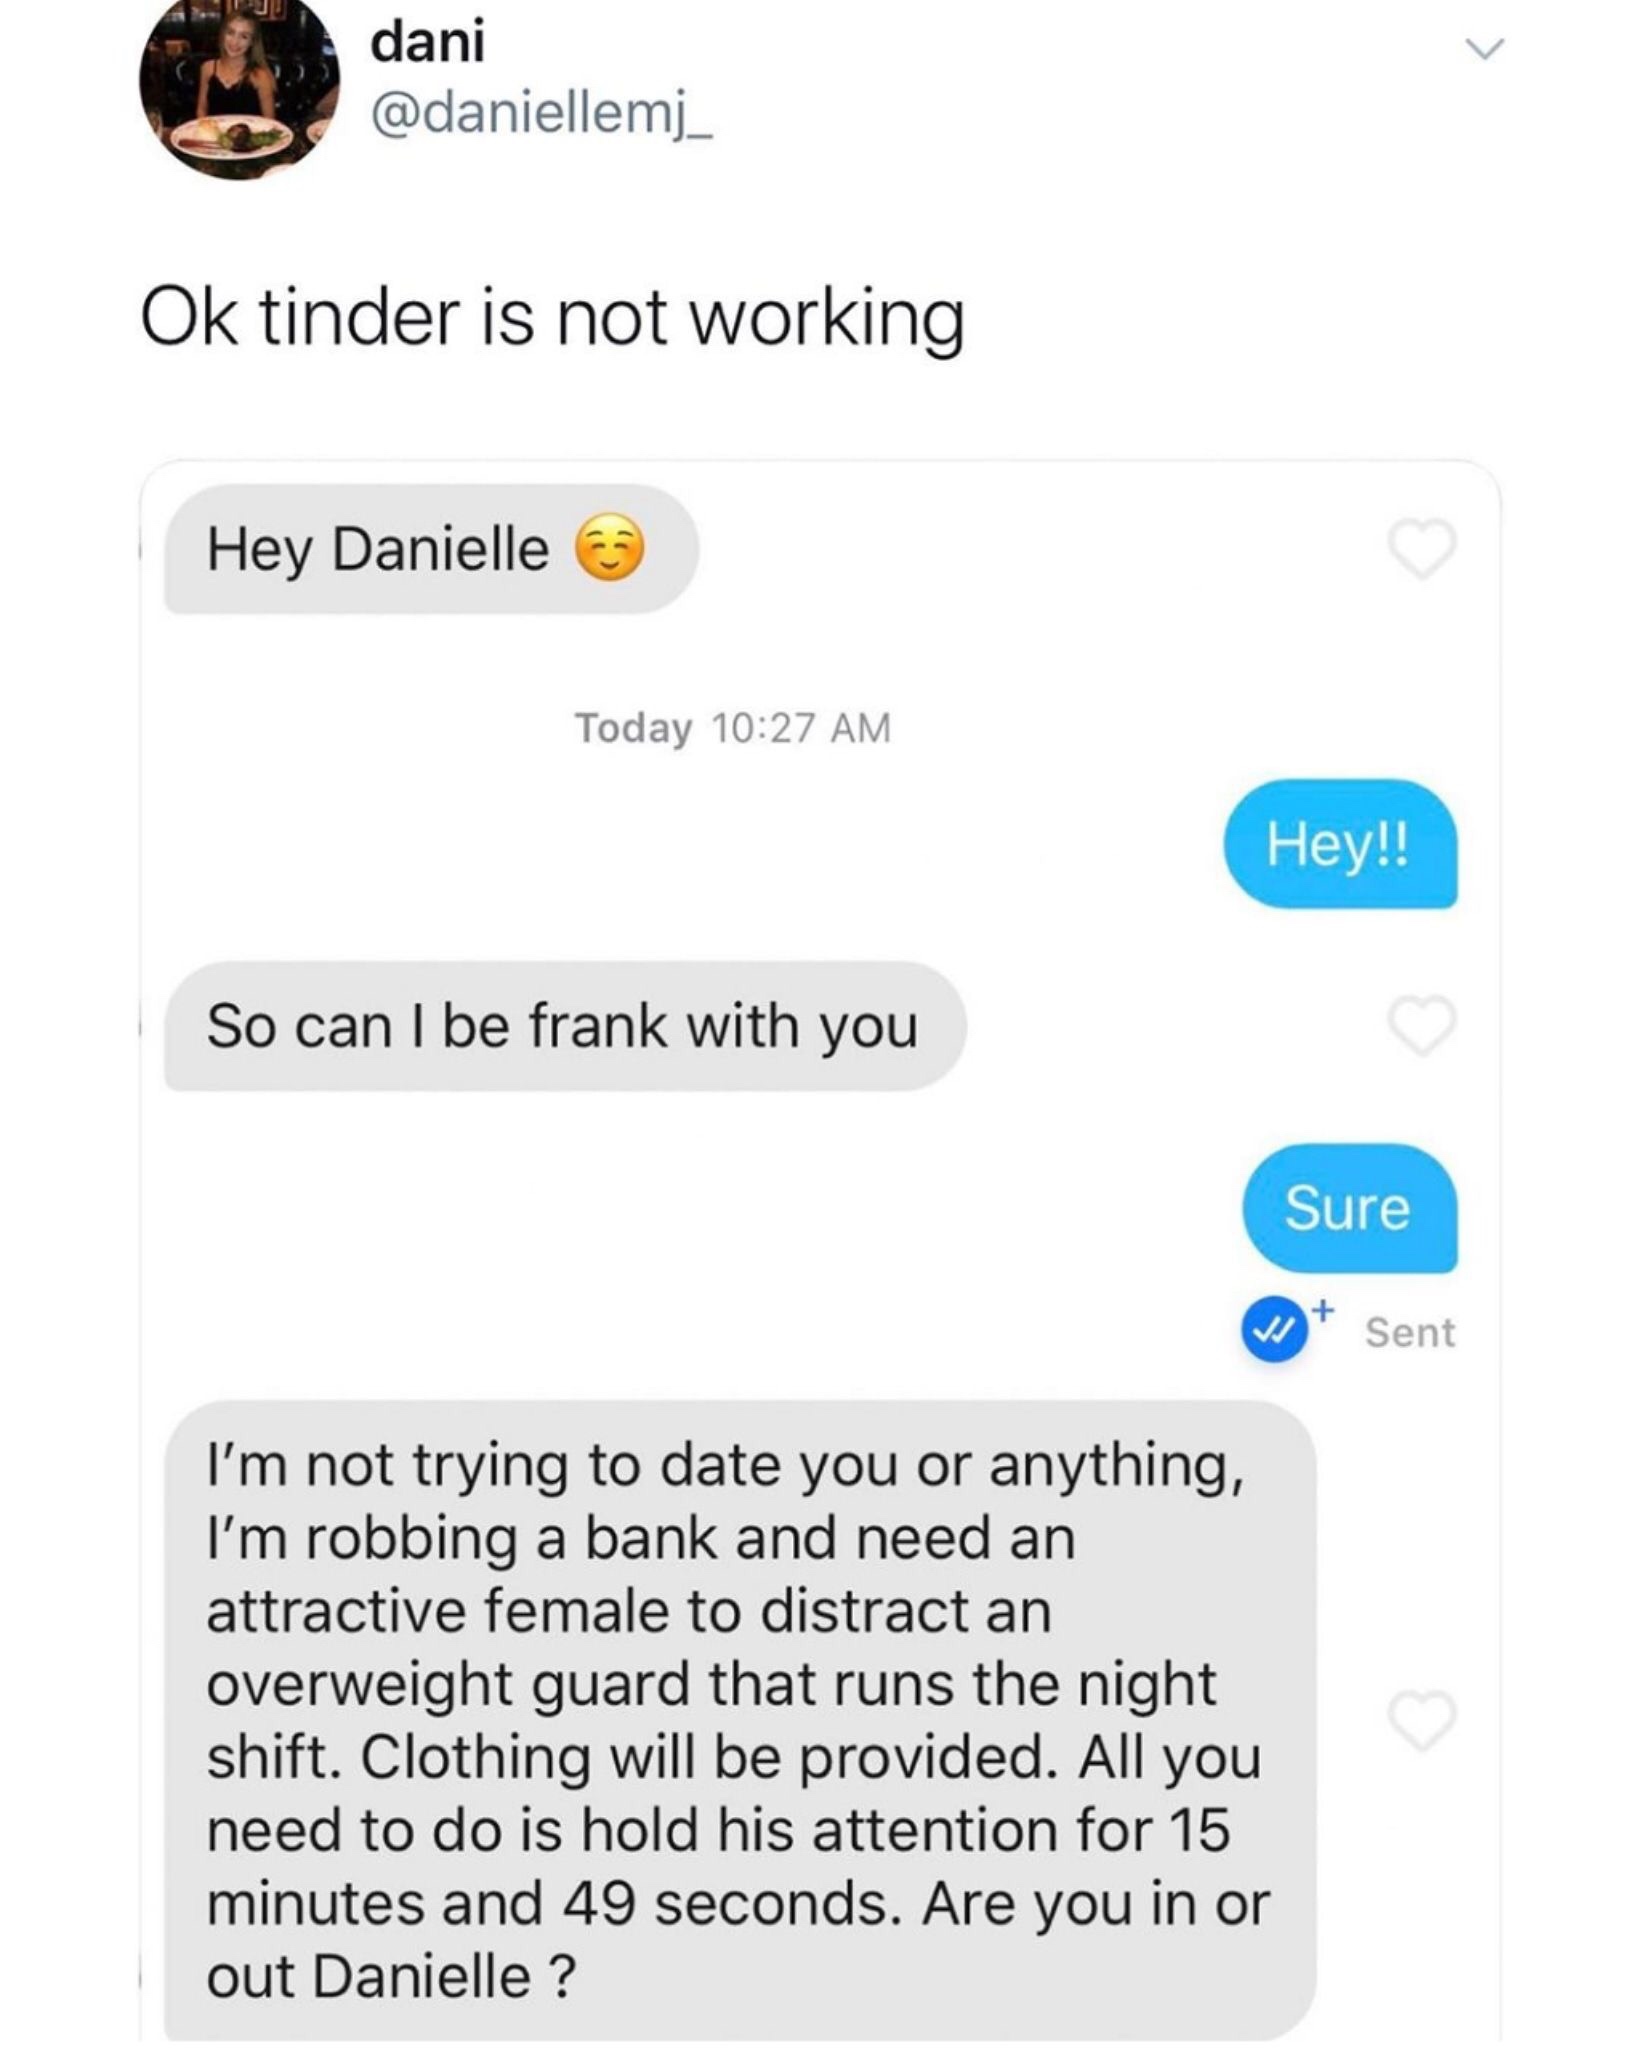 web page - dani Ok tinder is not working Hey Danielle Today Hey!! So can I be frank with you Sure Wt Sent I'm not trying to date you or anything, I'm robbing a bank and need an attractive female to distract an overweight guard that runs the night shift. C